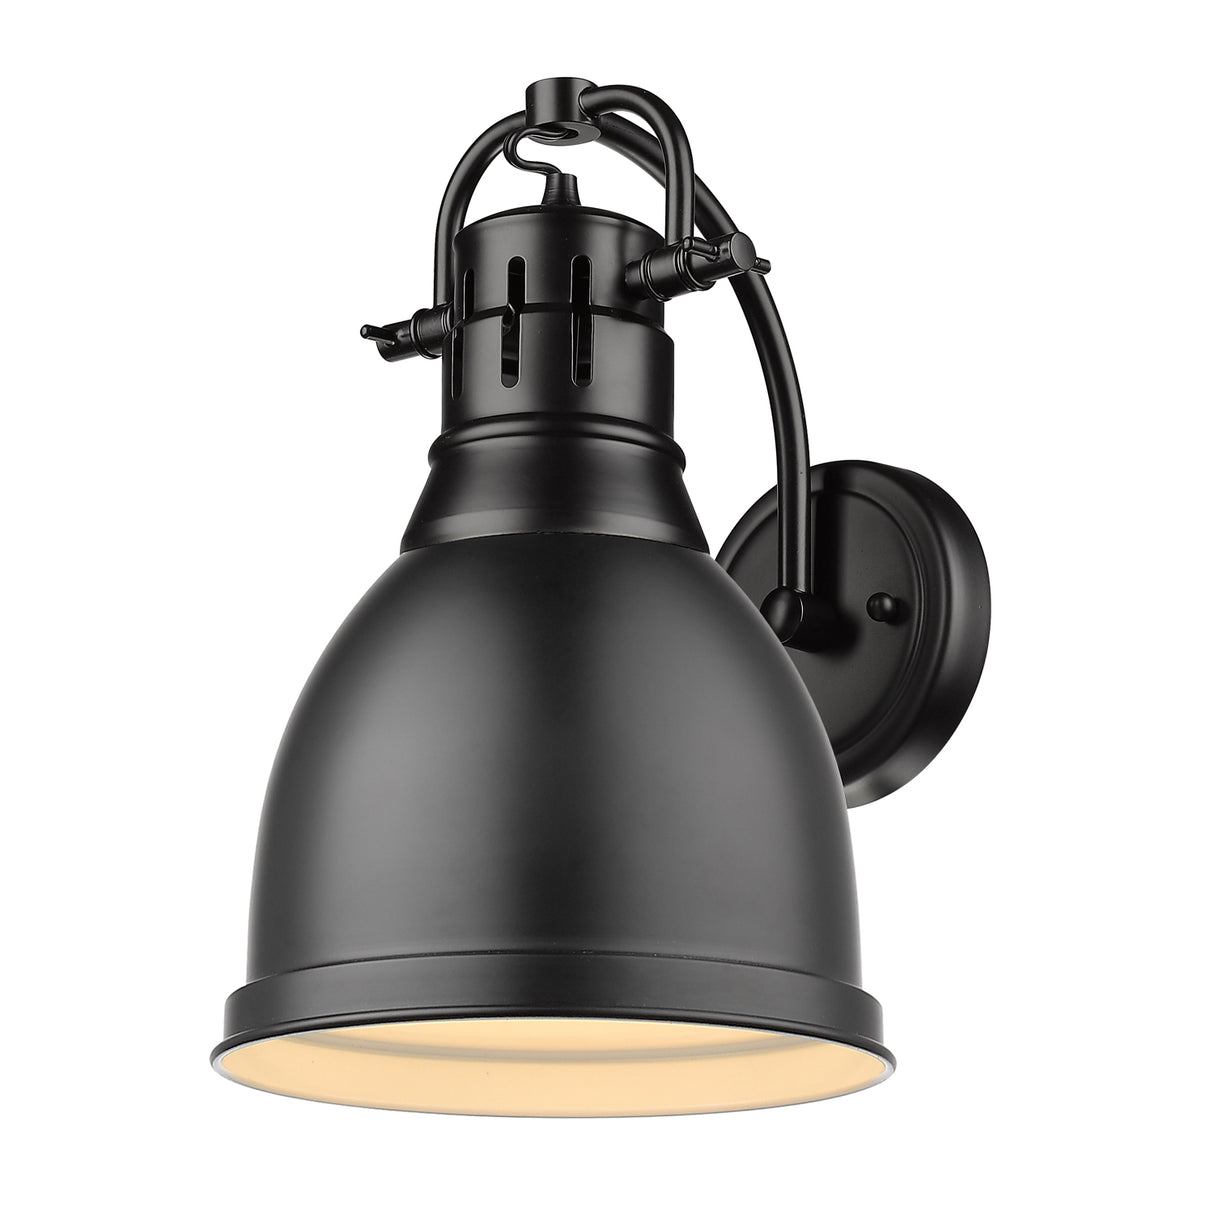 Duncan 1 Light Wall Sconce in Matte Black with a Matte Matte Black Shade